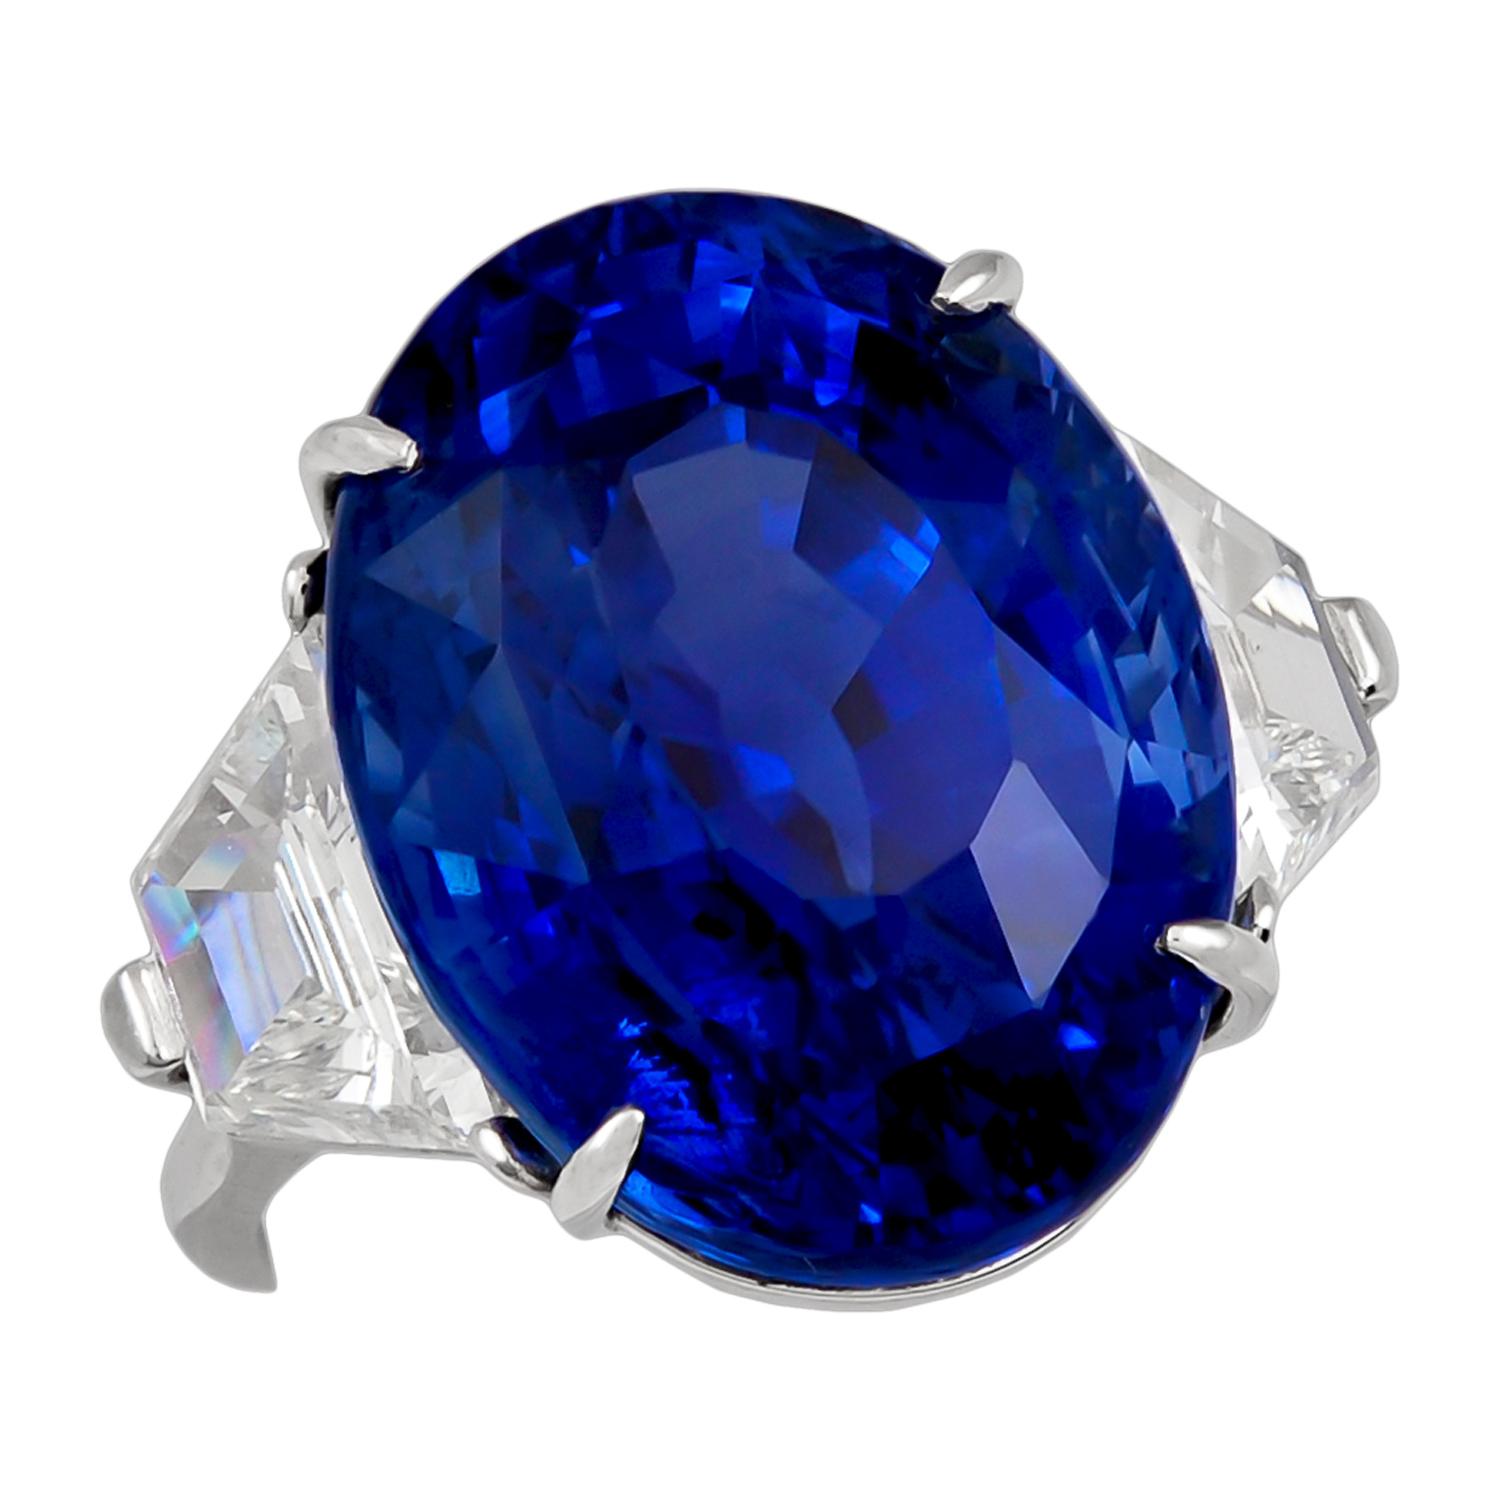 The oval-shaped ceylon sapphire weighing 29.83 carats, flanked by two trapeze diamonds weighing approximately 2.00 carats, size 5¾, signed Piranesi. 
Sapphire comes with GIA certificate.
Condition: Good - Previously owned and gently worn, with